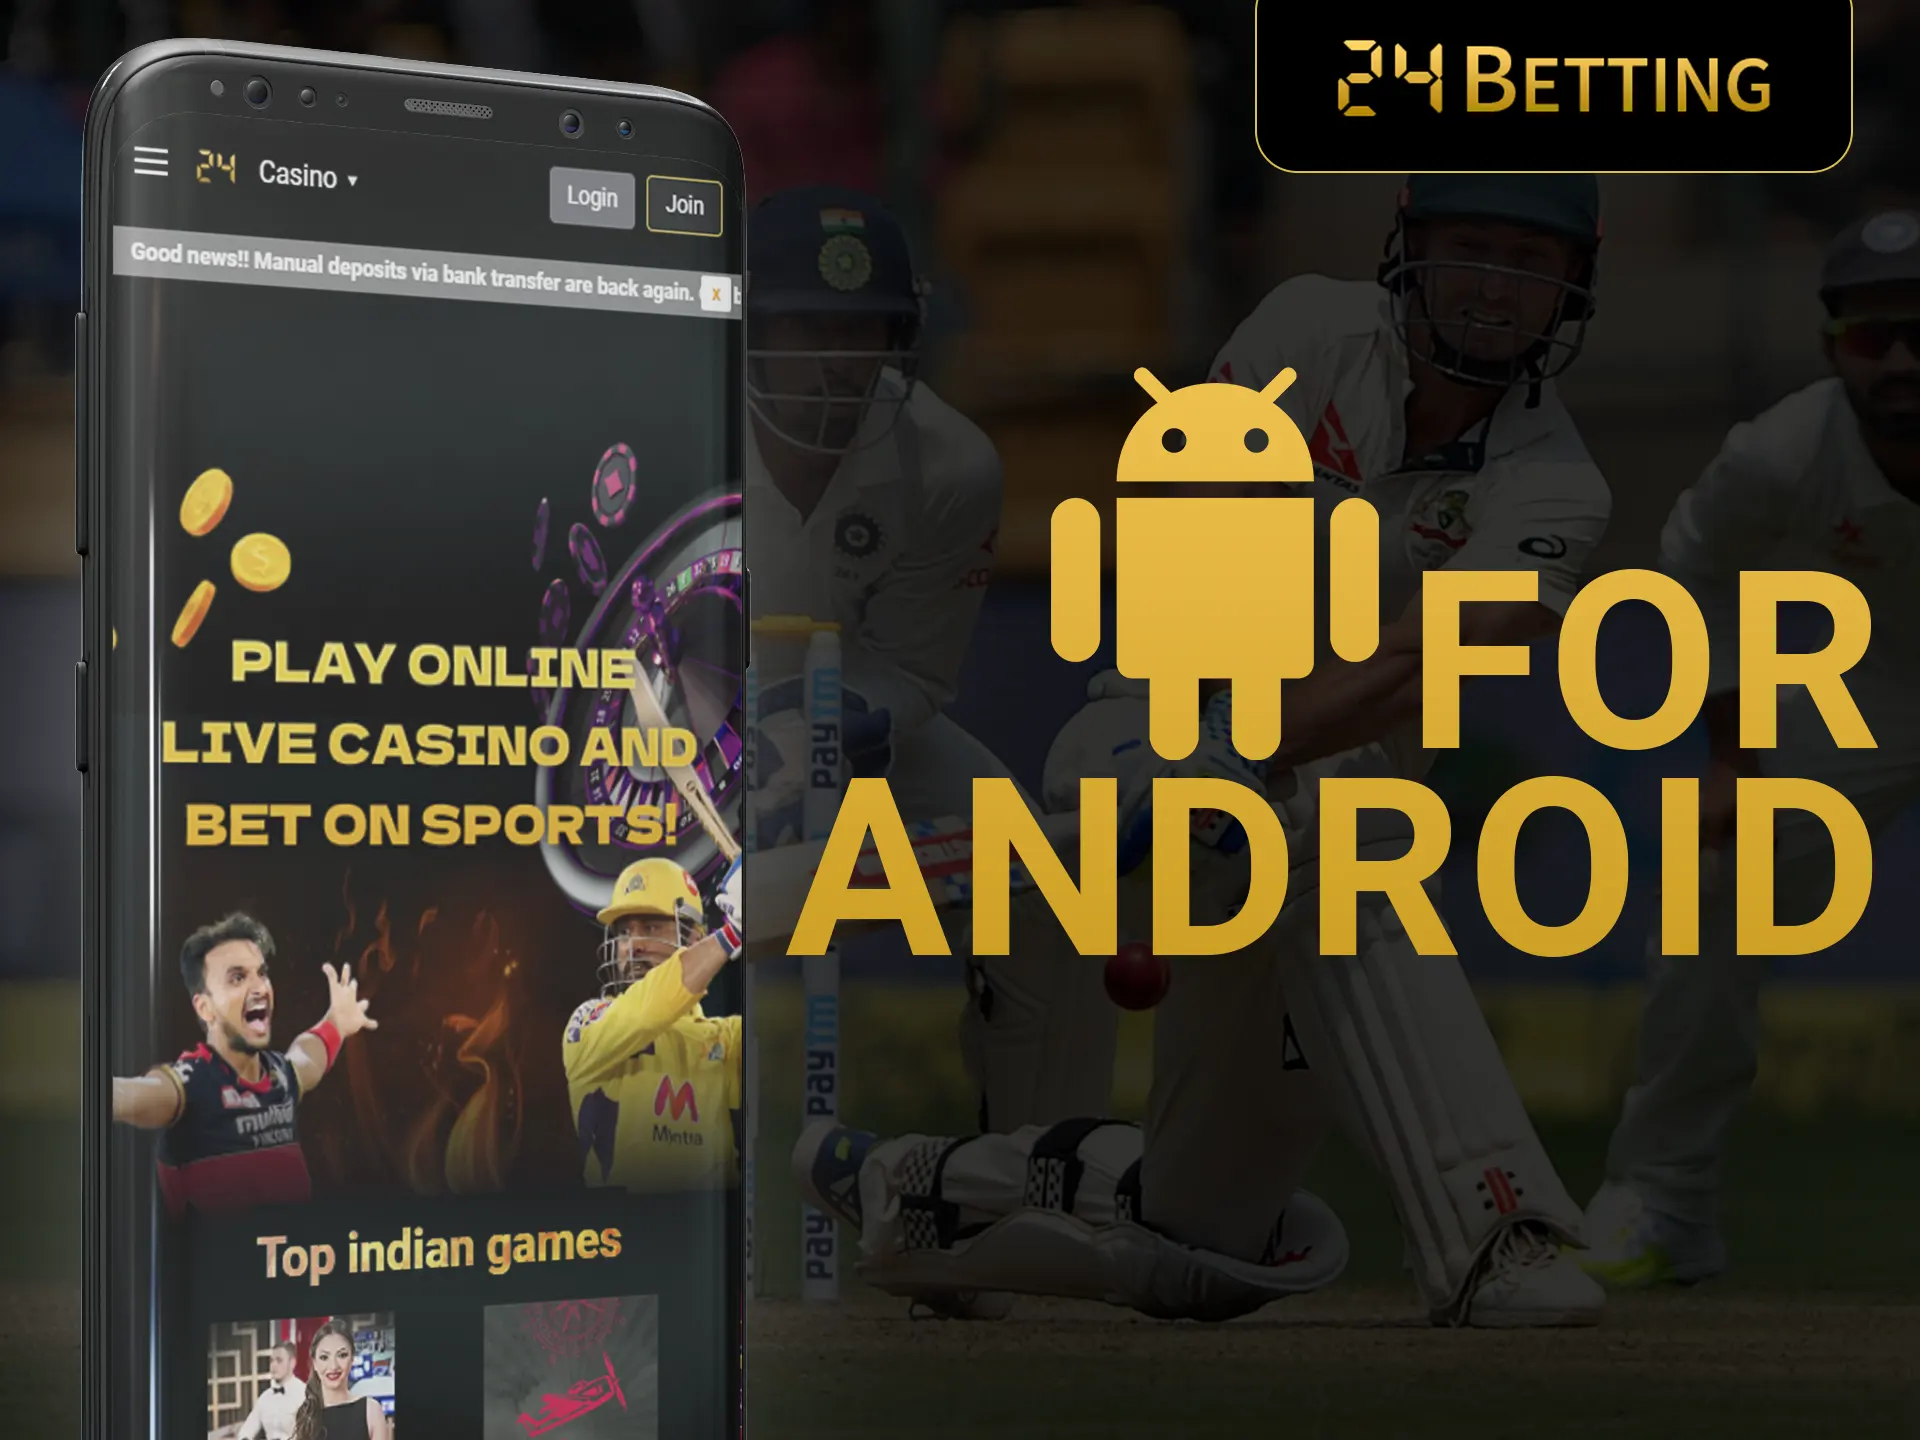 You can place bets on 24betting from your Android device.